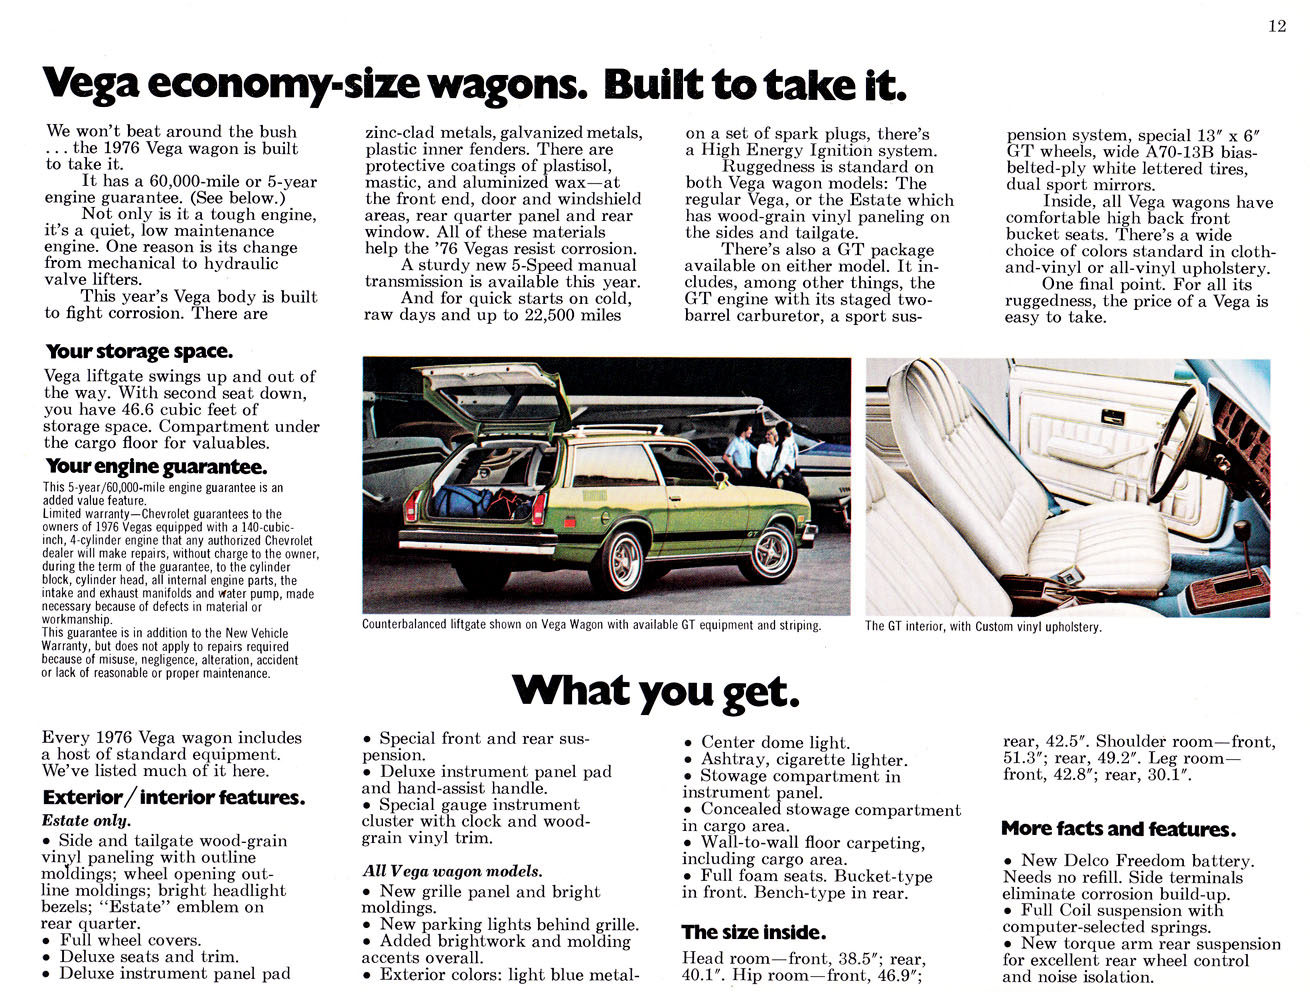 1976 Chevrolet Wagons Brochure Page 16